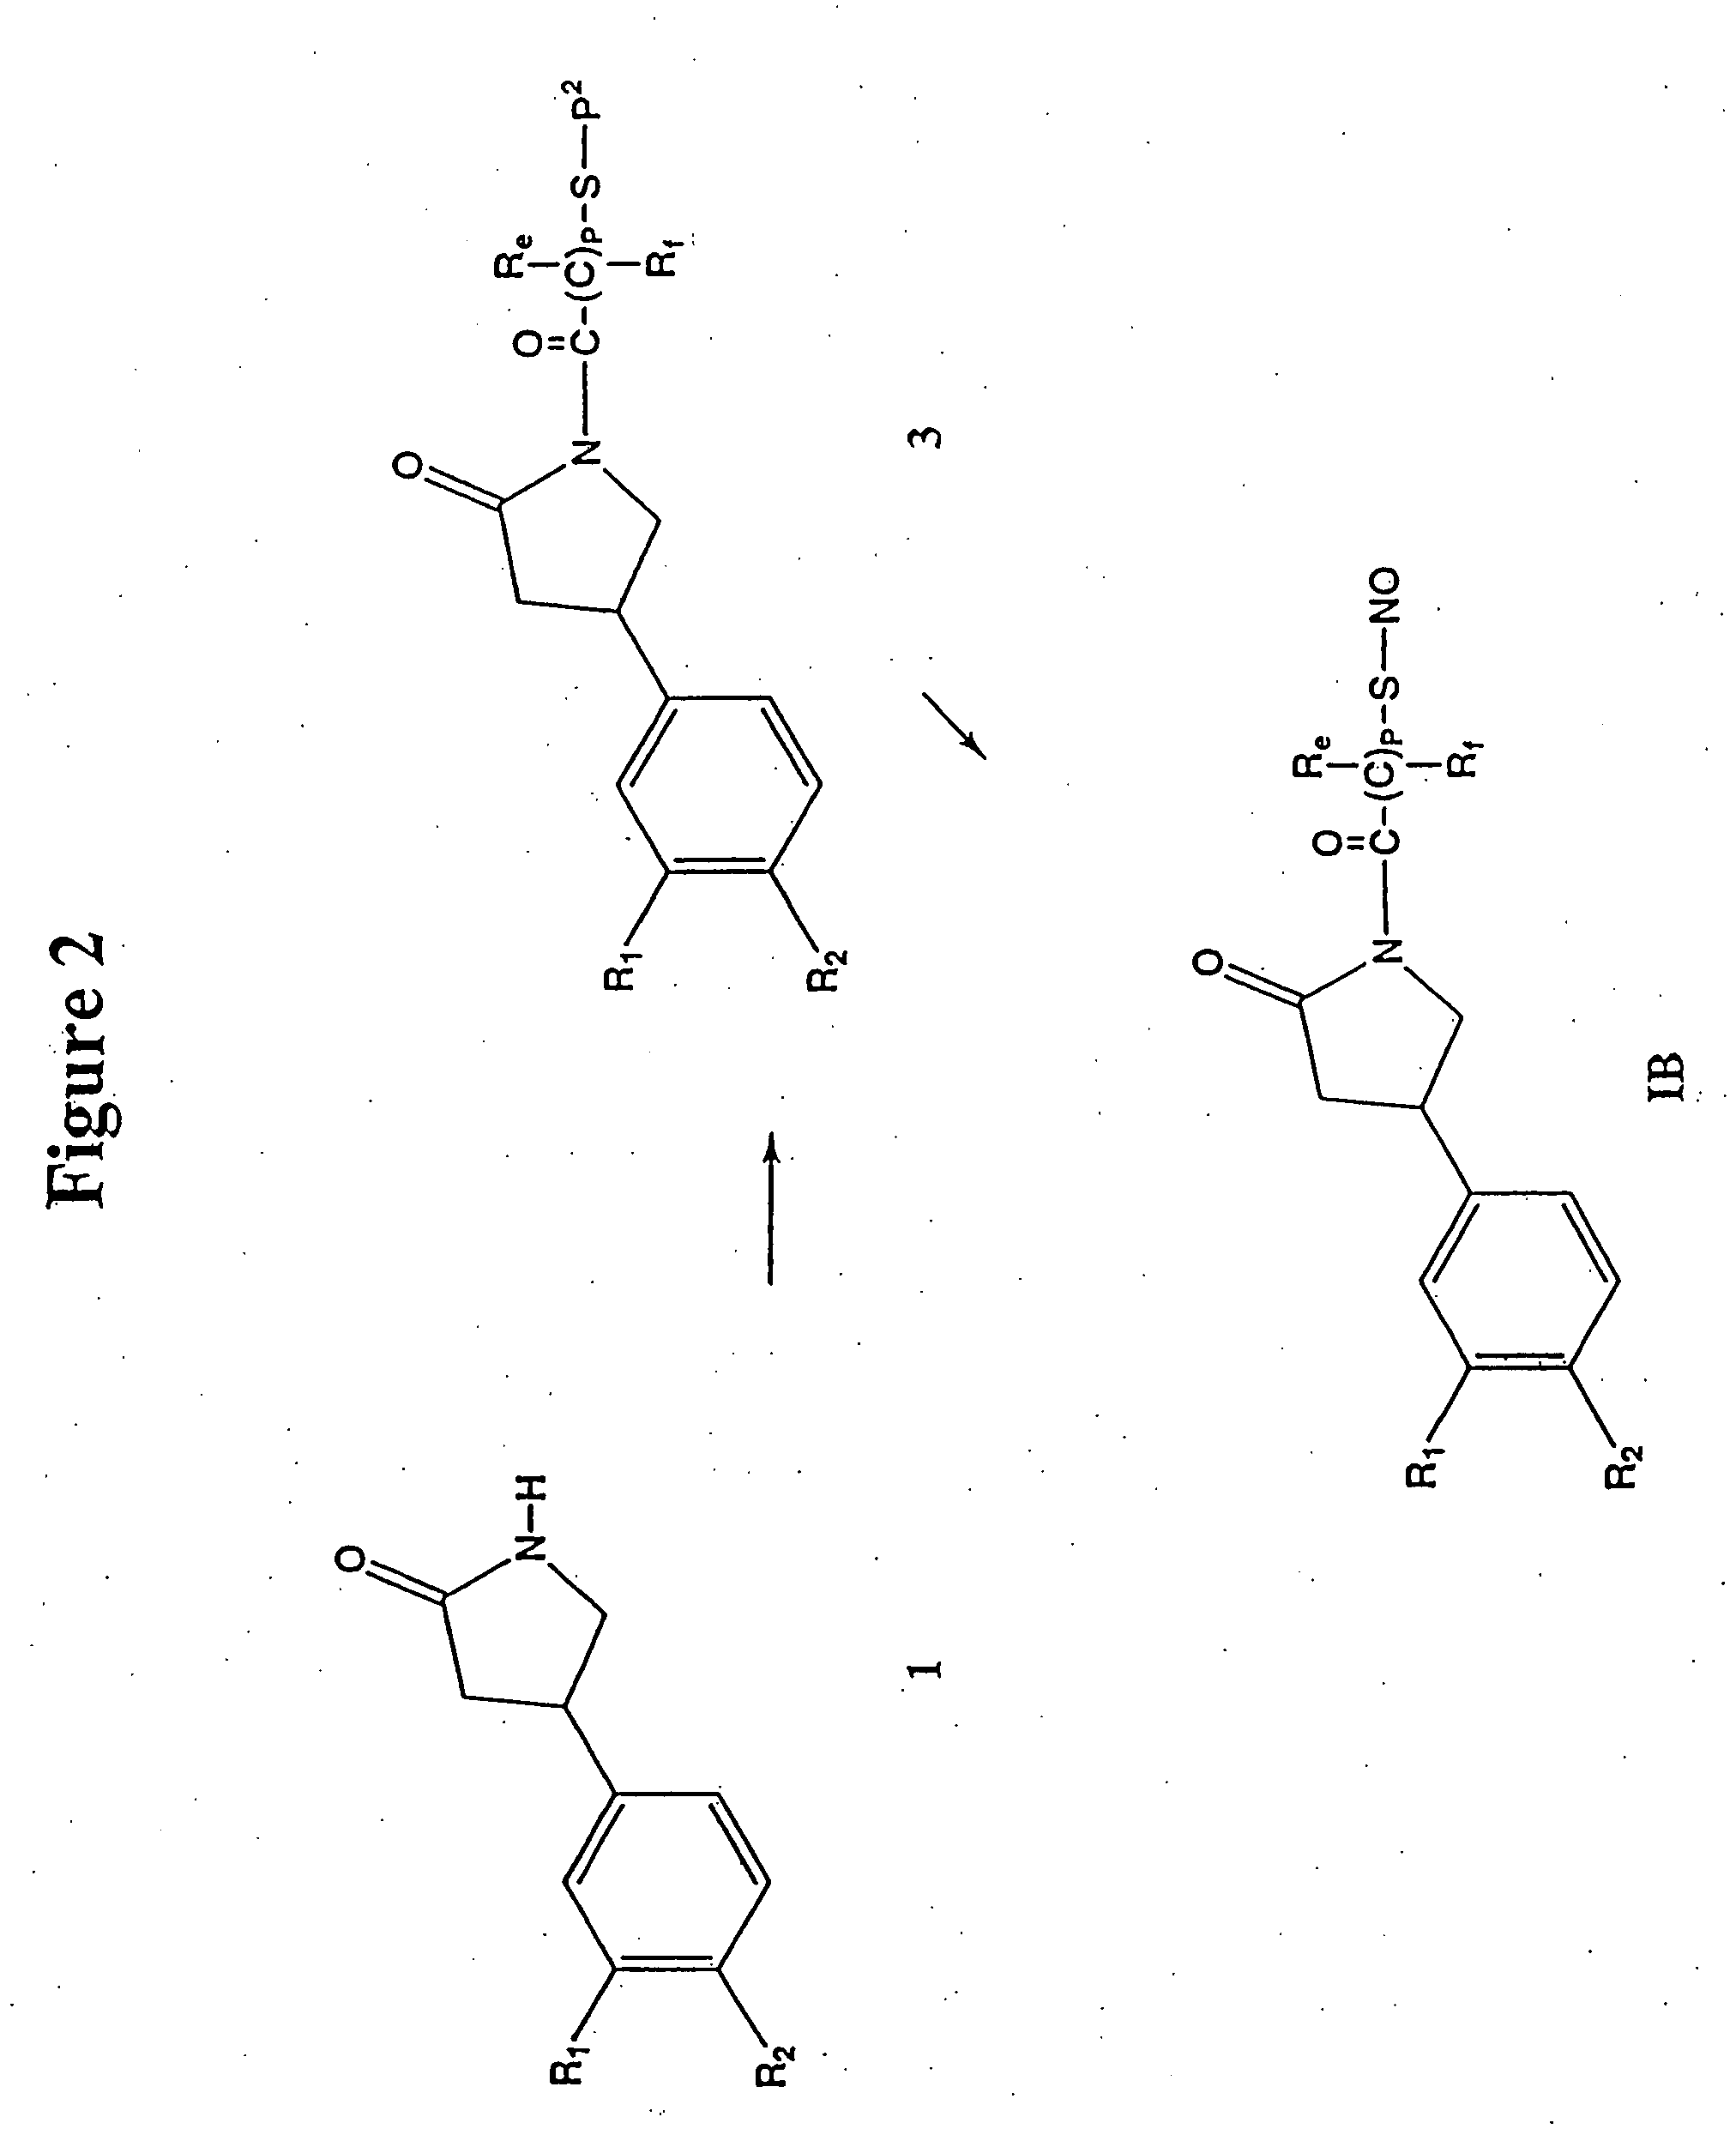 Phosphodiesterase inhibitors and nitric oxide donors, compositions and methods of use